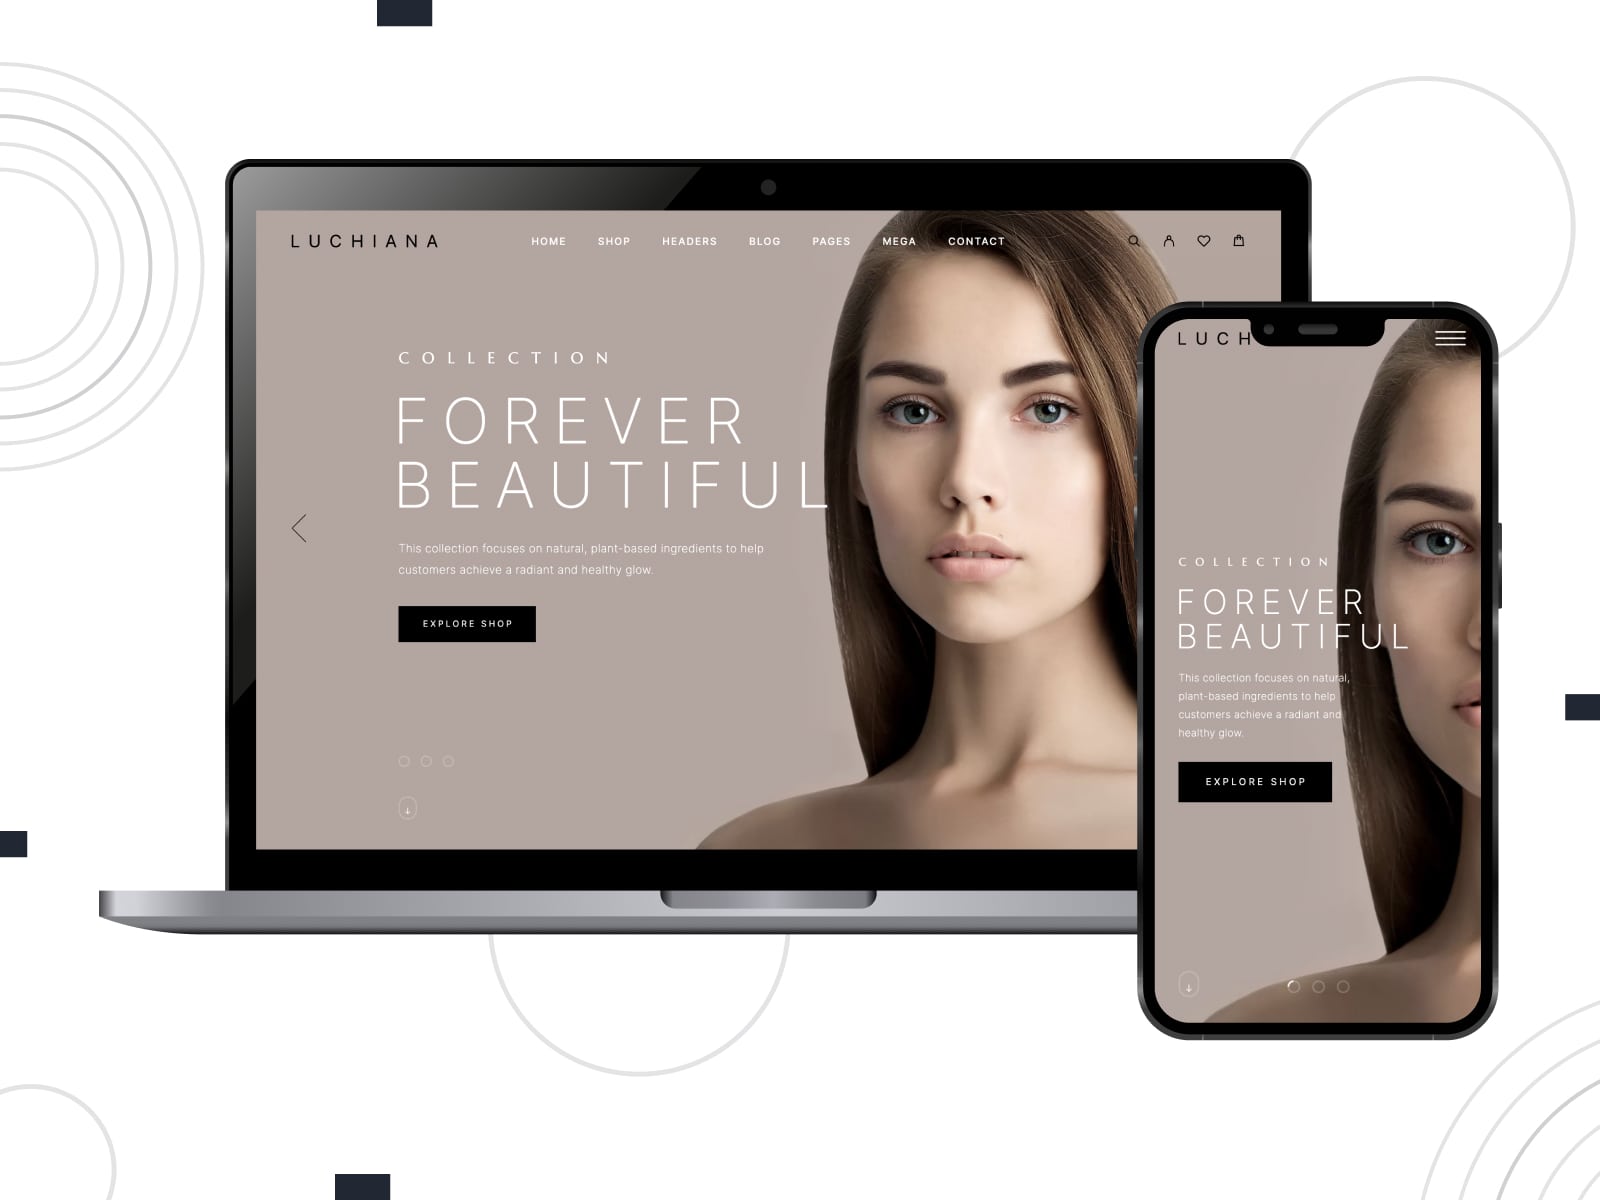 Collage of the Luchiana beauty and cosmetics shop WooCommerce Elementor theme demo on mobile and desktop screens.